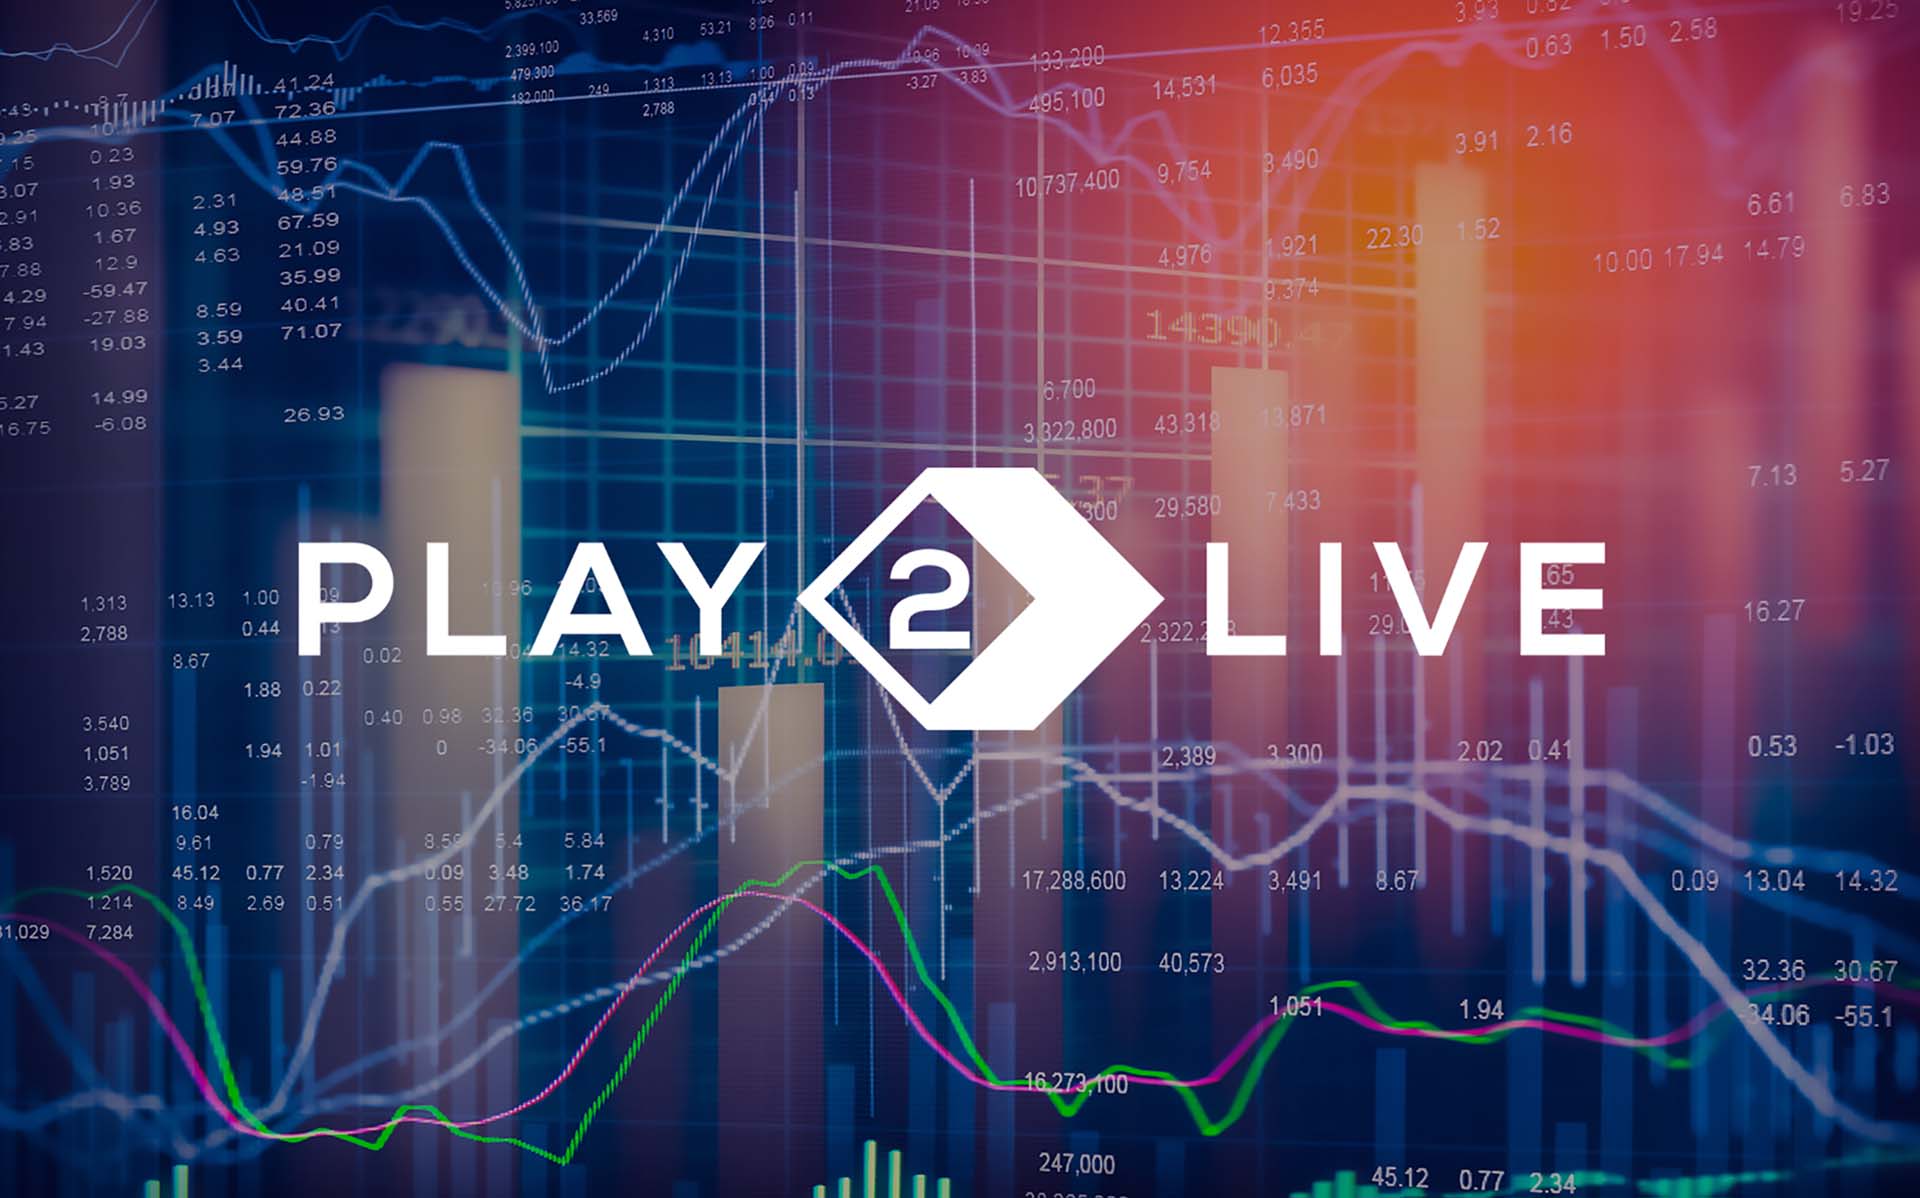 Play2Live Enters Crypto Exchanges and Launches Payments in LUC Tokens on P2L.TV